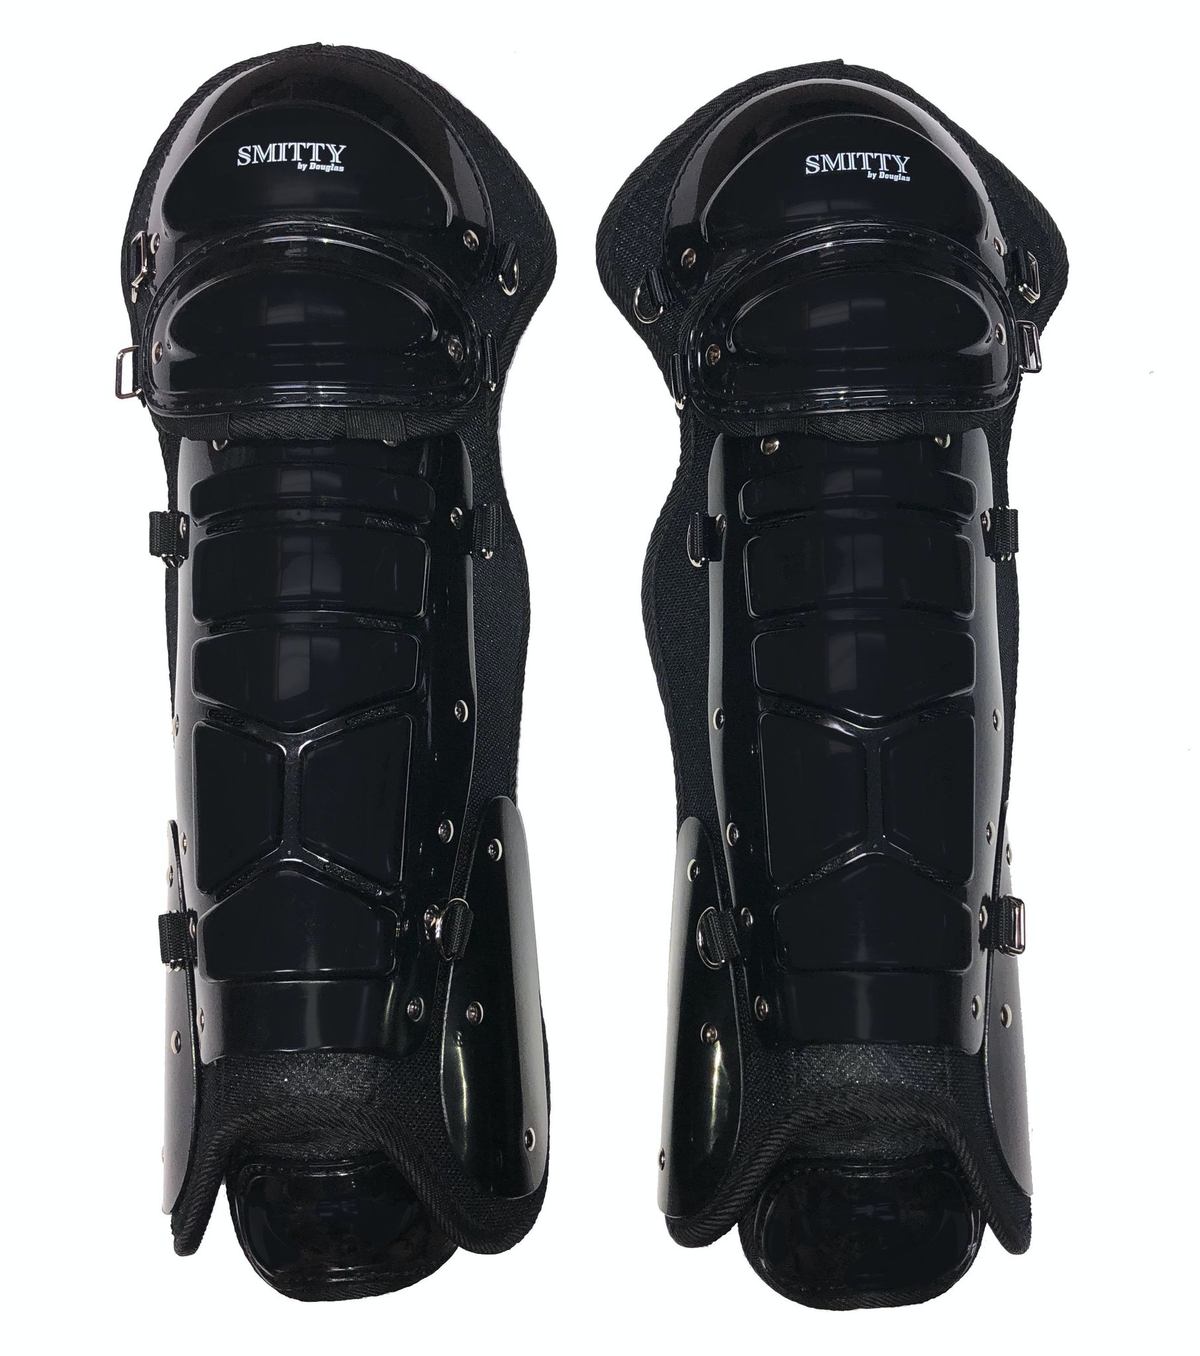 Smitty | SPE-DLG | Double Leg Knee Guards | Shin Guards